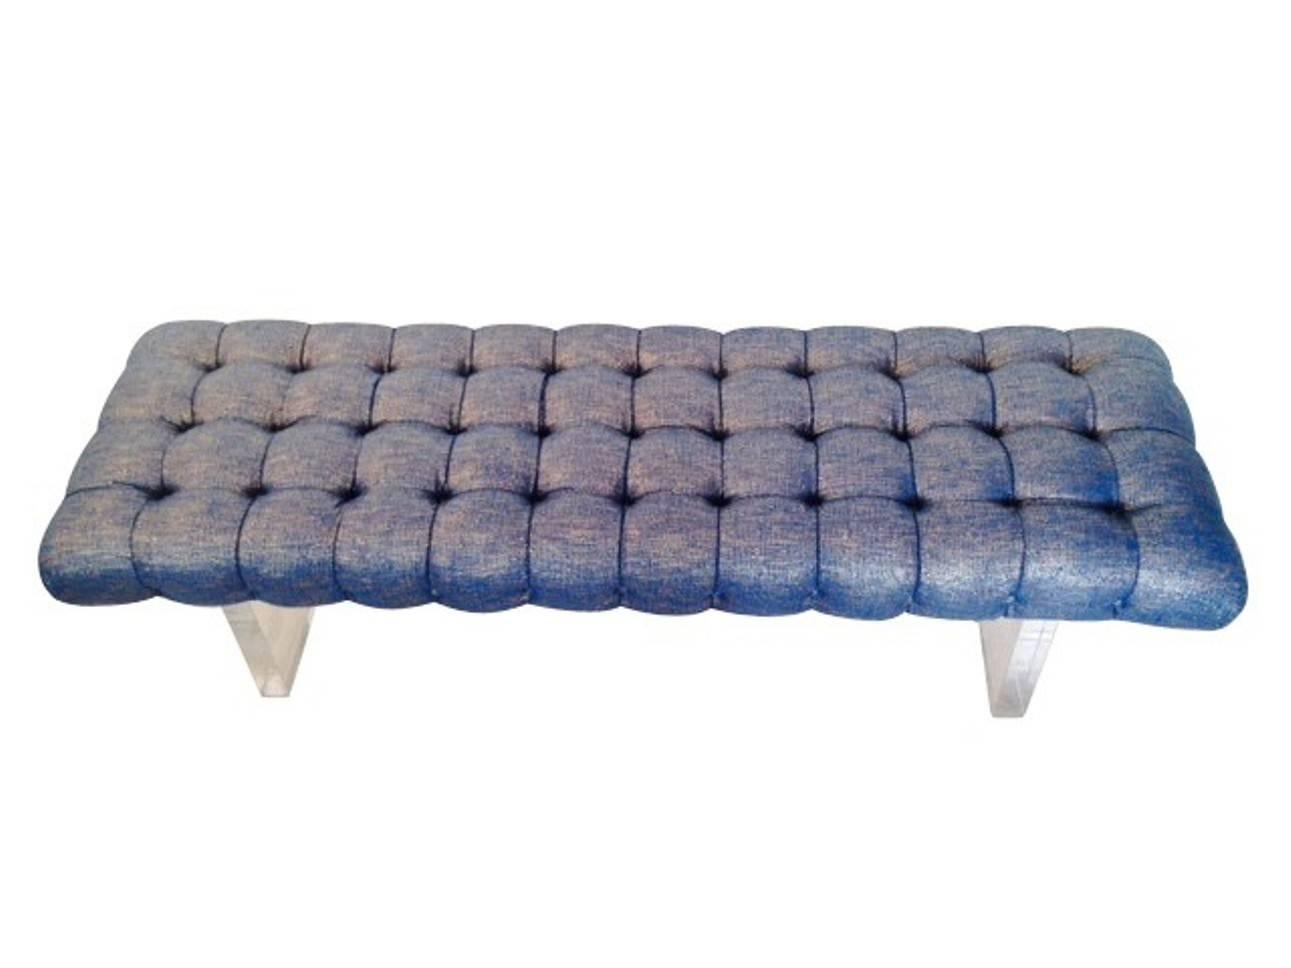 Contemporary custom fabricated Lucite bench with a tufted seat cushion in shimmering metallic silver and blue woven silk, wool and linen linen fabric from Romo. Bench legs are constructed from a 2